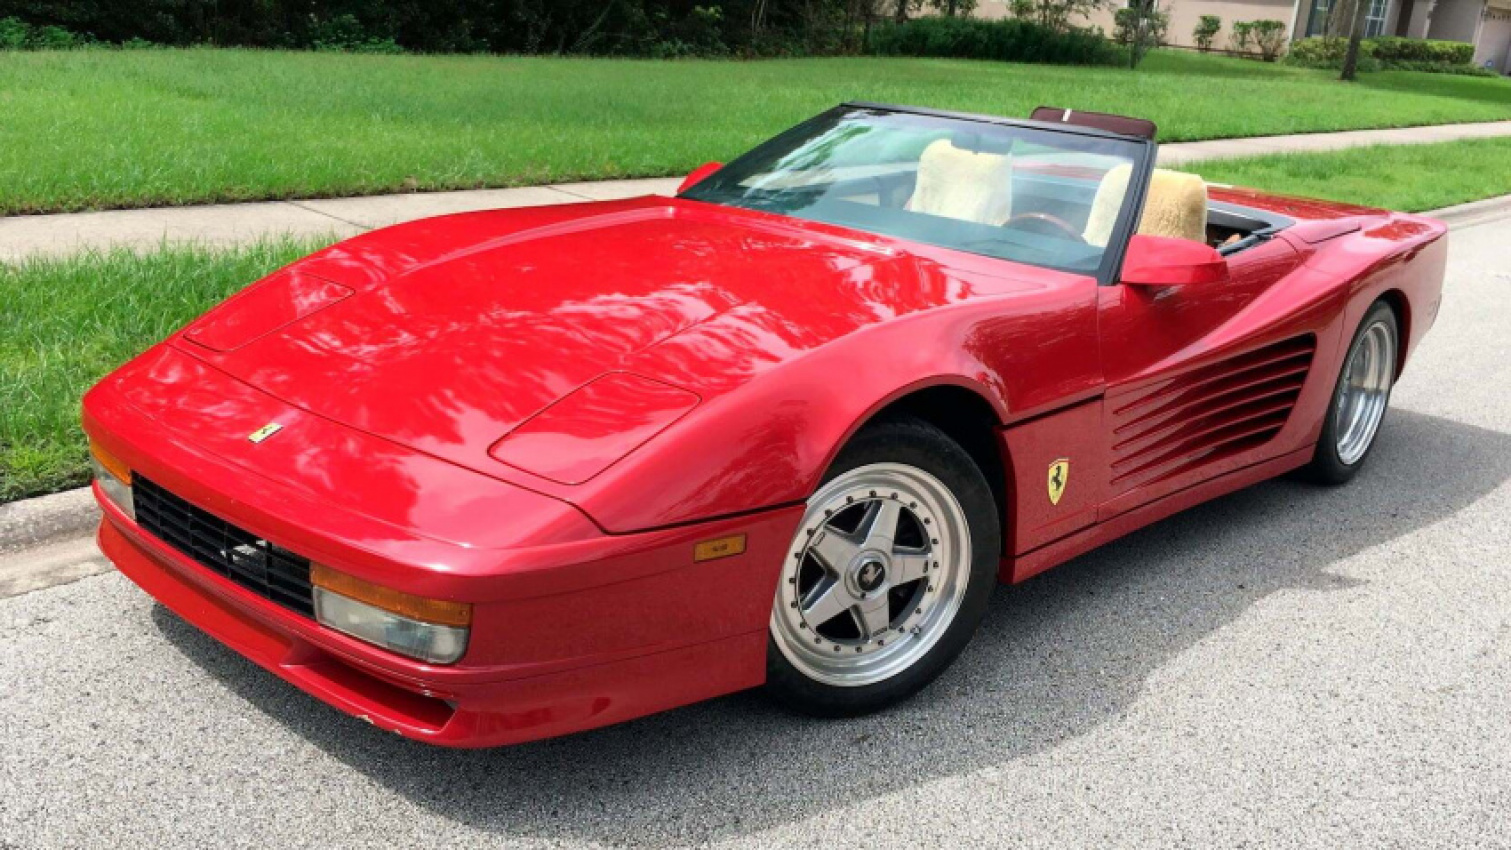 autos, cars, chevrolet, chevrolet corvette, corvette, ferrari, corvette, this ferrari-like corvette is actually a real thing